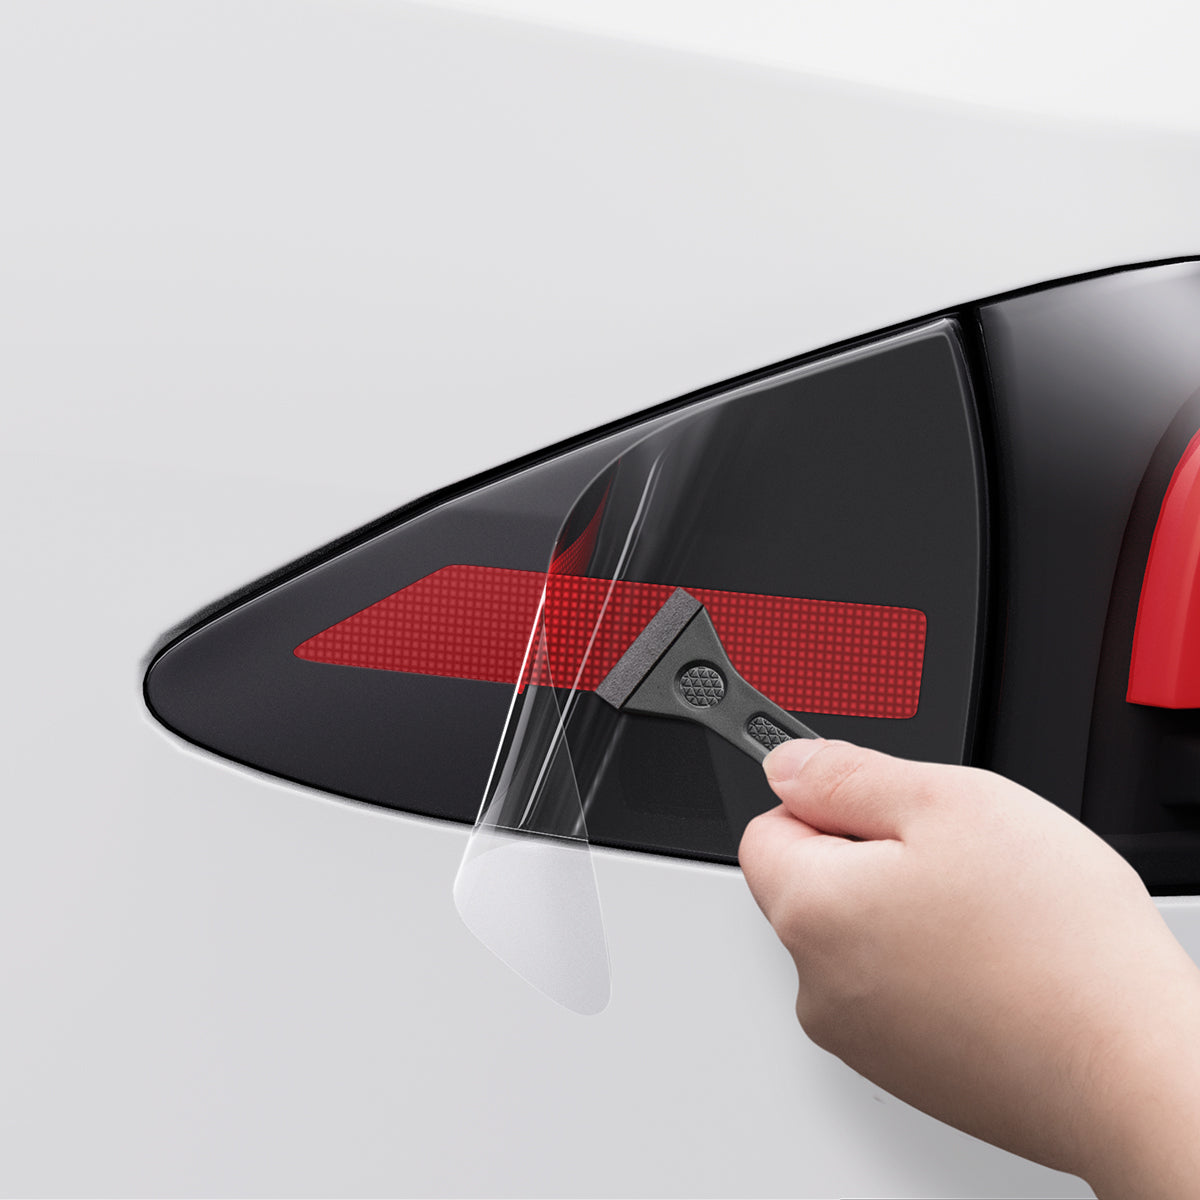 AFL07572 - Tesla Model S Charging Port Protective Film TO421 in Transparency showing the careful application of the protective film using the squeegee tool